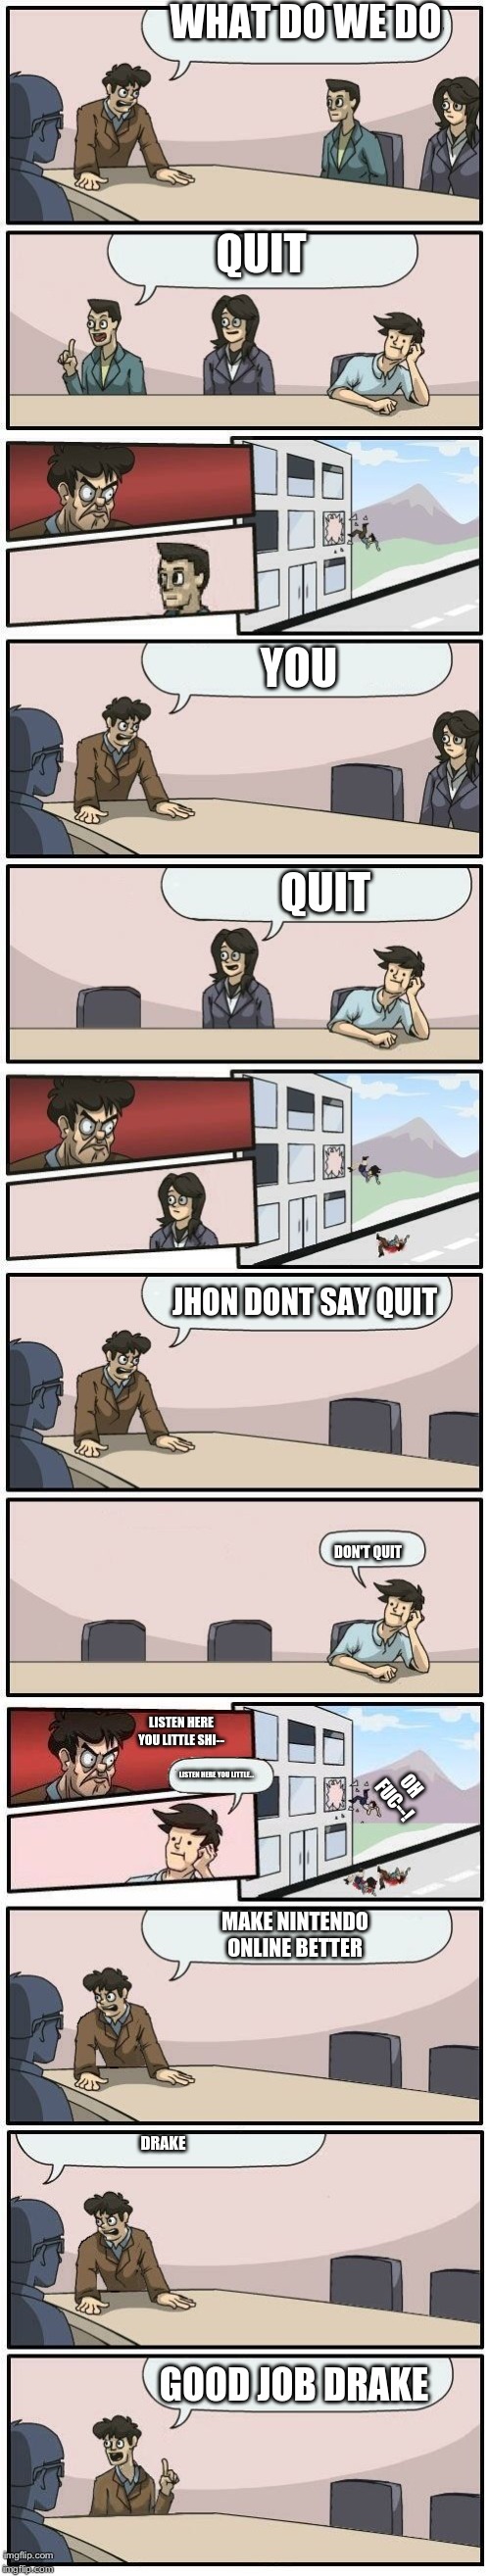 Boardroom Meeting Suggestions Extended | WHAT DO WE DO; QUIT; YOU; QUIT; JHON DONT SAY QUIT; DON'T QUIT; LISTEN HERE YOU LITTLE SHI--; LISTEN HERE YOU LITTLE... OH FUC--! MAKE NINTENDO ONLINE BETTER; DRAKE; GOOD JOB DRAKE | image tagged in boardroom meeting suggestions extended | made w/ Imgflip meme maker